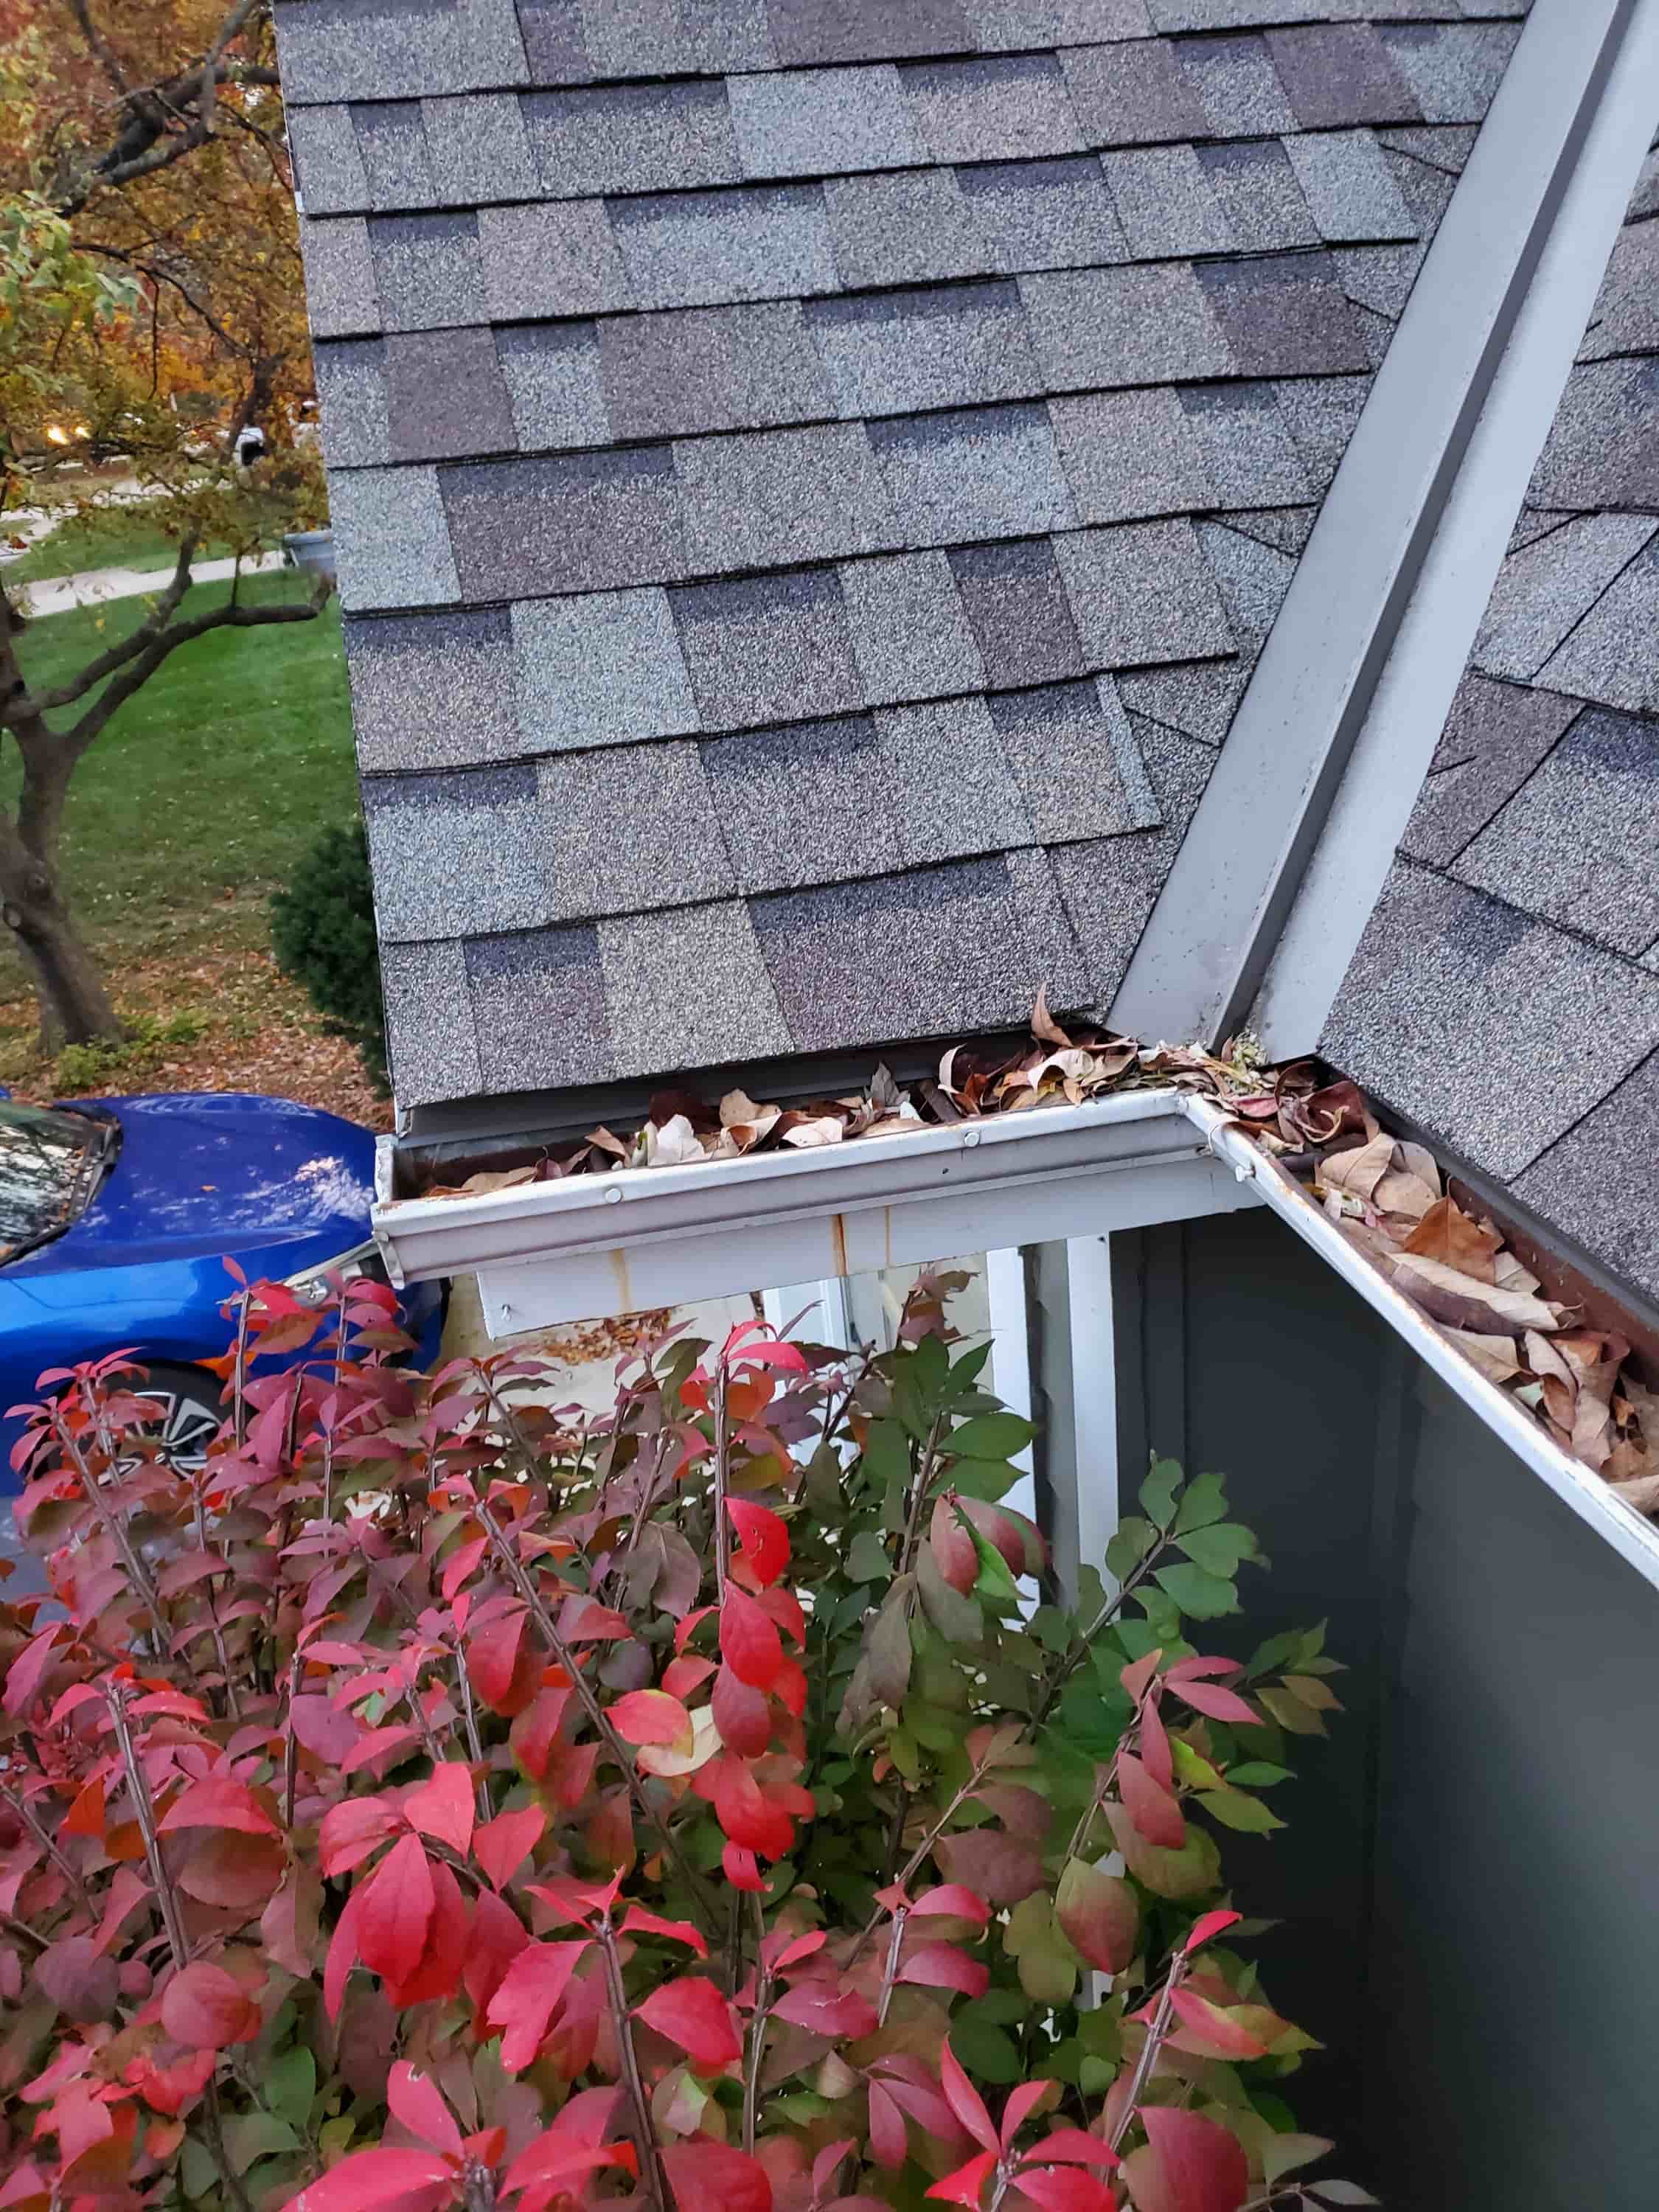 fall gutter cleaning